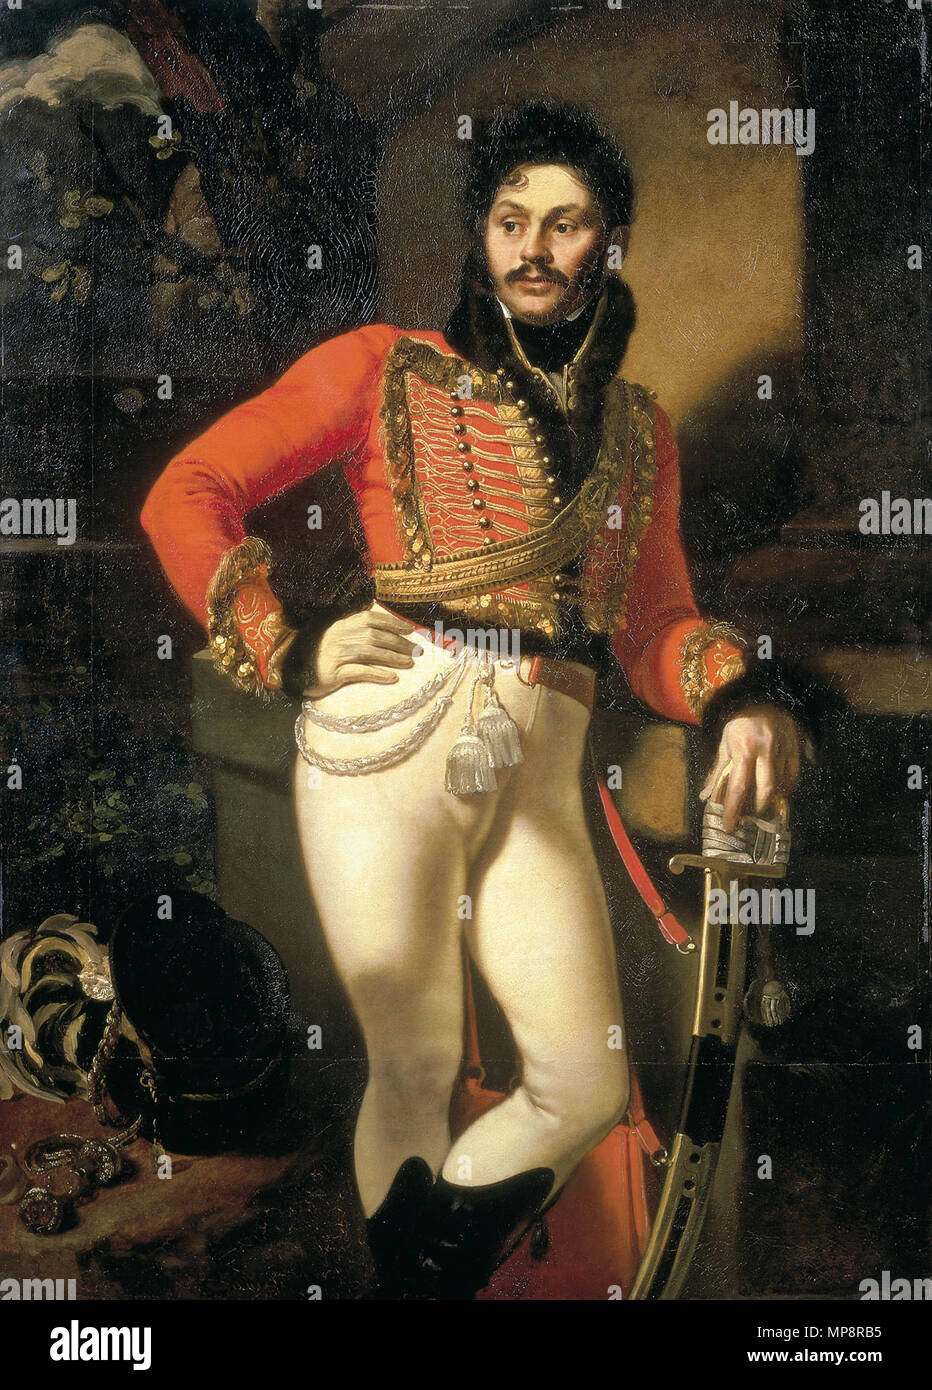 Русский: Портрет лейб-гусарского полковника Е.В.Давыдова Portrait of Life Guard Colonel Yevgraf Davydov.  The portrait is Orest Kiprensky’s most famous canvas and a specific manifesto of the art of the Romantic era in Russia. It was one of the works for which Kiprensky was made an academician in 1812. Yevgraf Davydov (1775–1823): Sergeant major of the Life Guards Cavalry Regiment (1791), cornet of the Life Guards Hussar Regiment (1799), colonel (1807). Fought in the Napoleonic Wars at the Battle of Austerlitz (1805) and the Battle of Ostrovnoye near Vitebsk (1812). Lost his left leg and right  Stock Photo